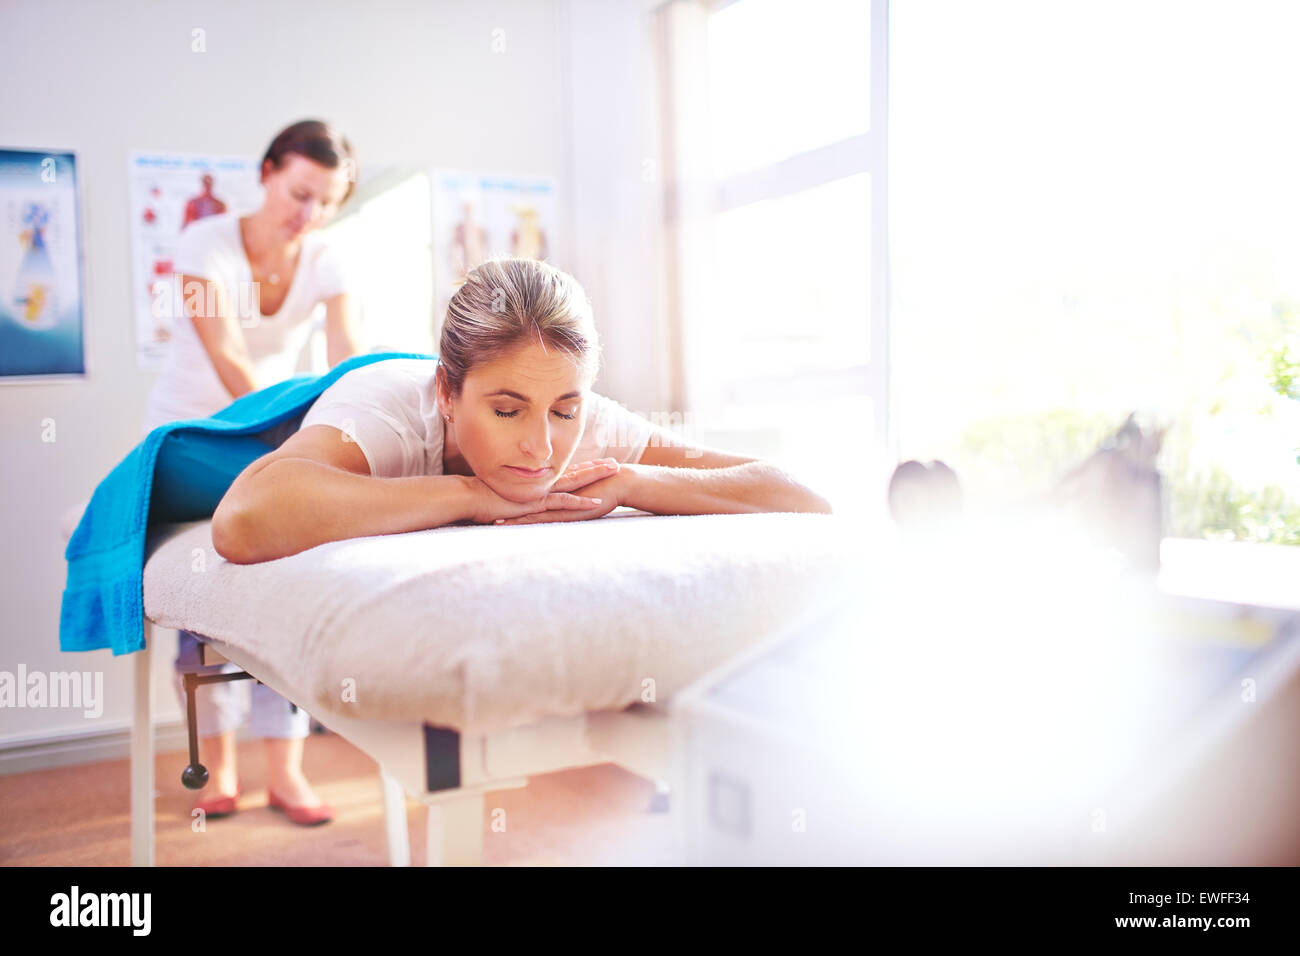 Woman receiving massage by physical therapist Stock Photo